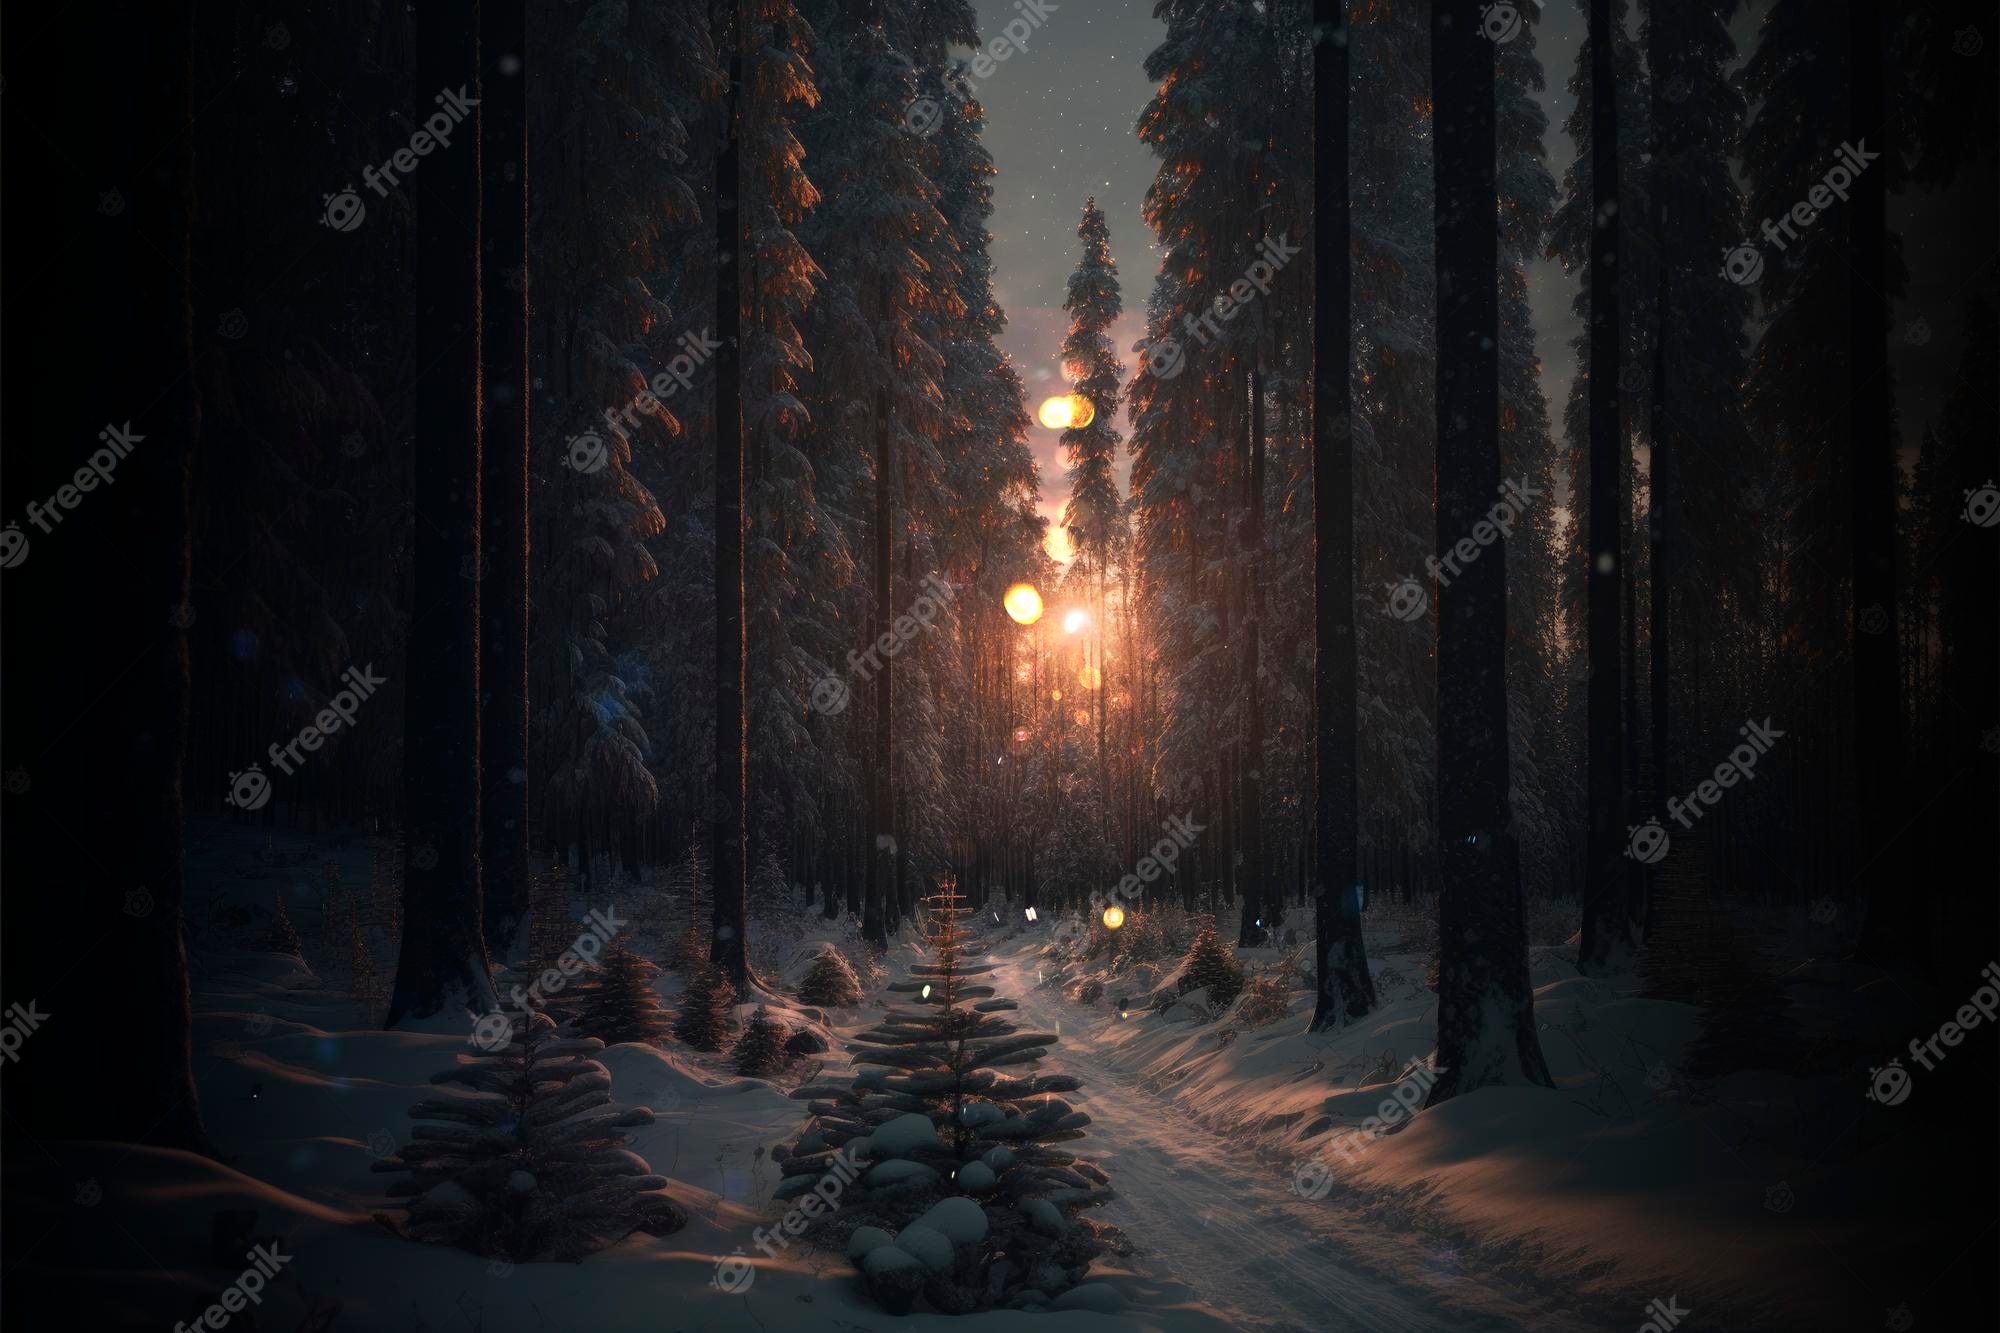 A snowy forest with lights in the background - Magic